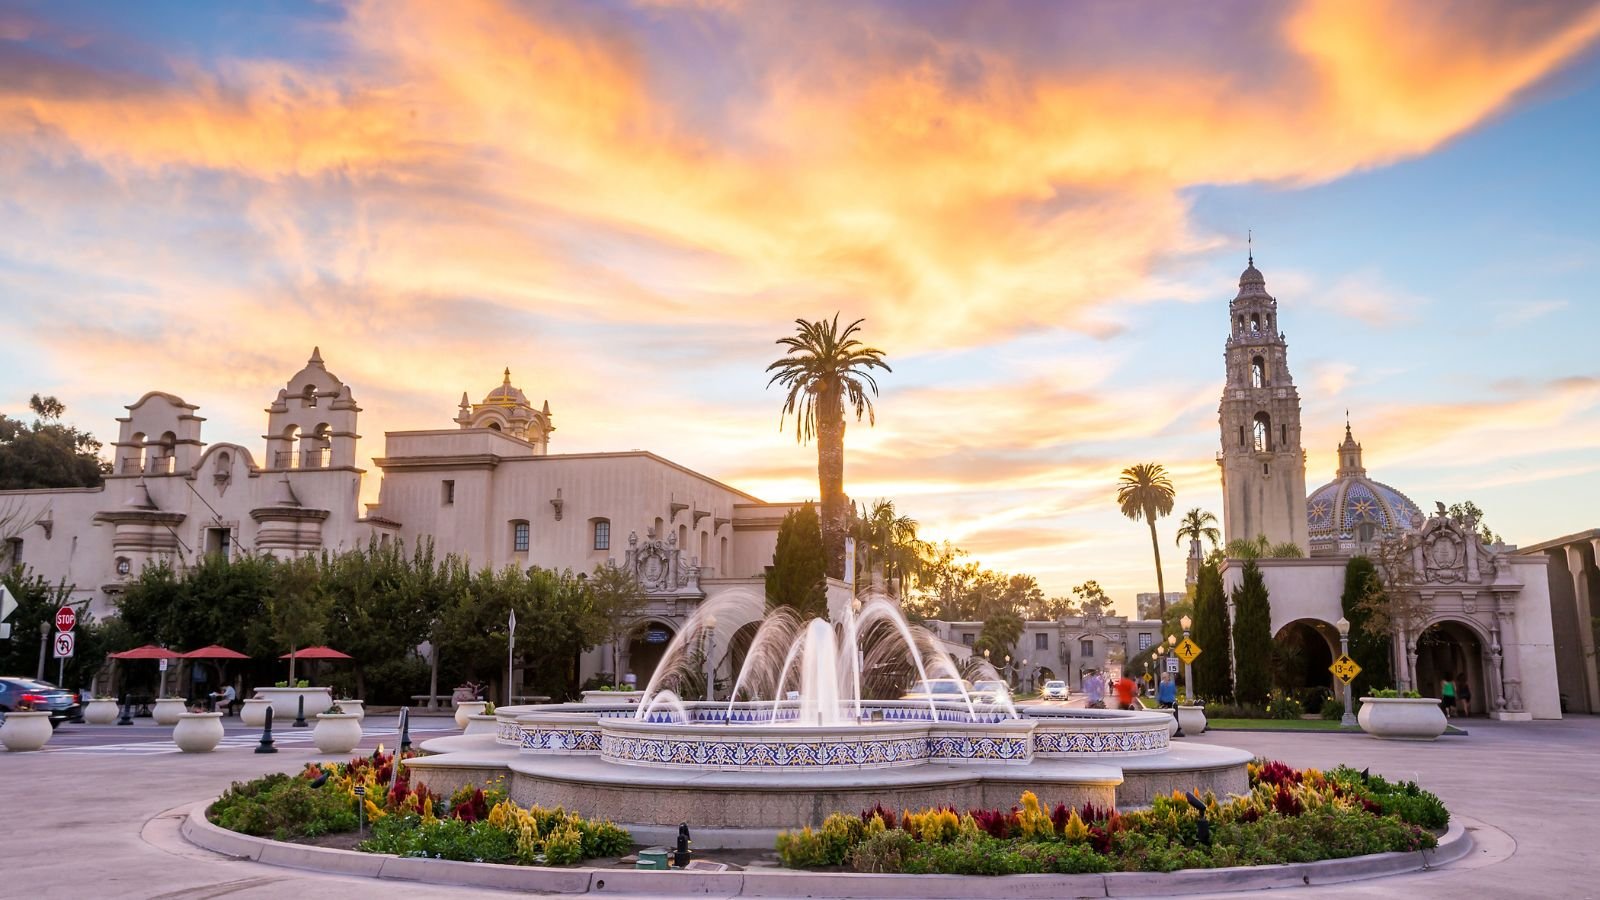 <p>San Diego has pleasant weather, pristine beaches, and lively seaside attractions. It is perfect for seniors who love the outdoors. The Gaslamp Quarter and Balboa Park are walkable and offer heaps of sights. La Jolla impresses with upscale shops and coastal views.</p>